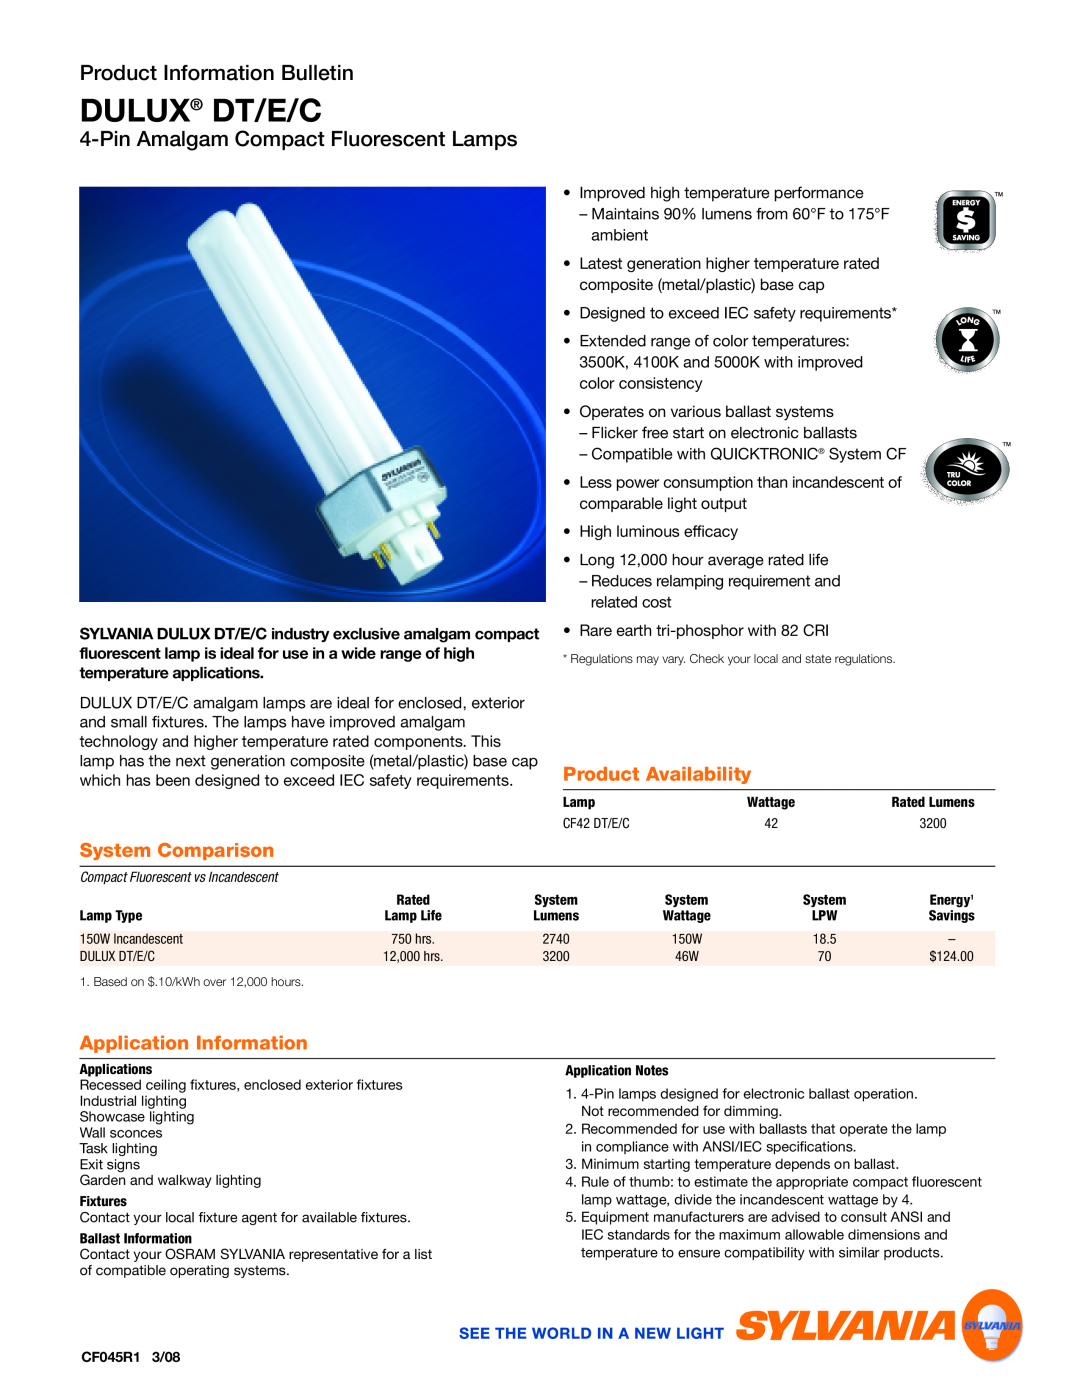 Sylvania 20866, CF42, 20851 specifications Product Availability, System Comparison, Application Information, Dulux Dt/E/C 